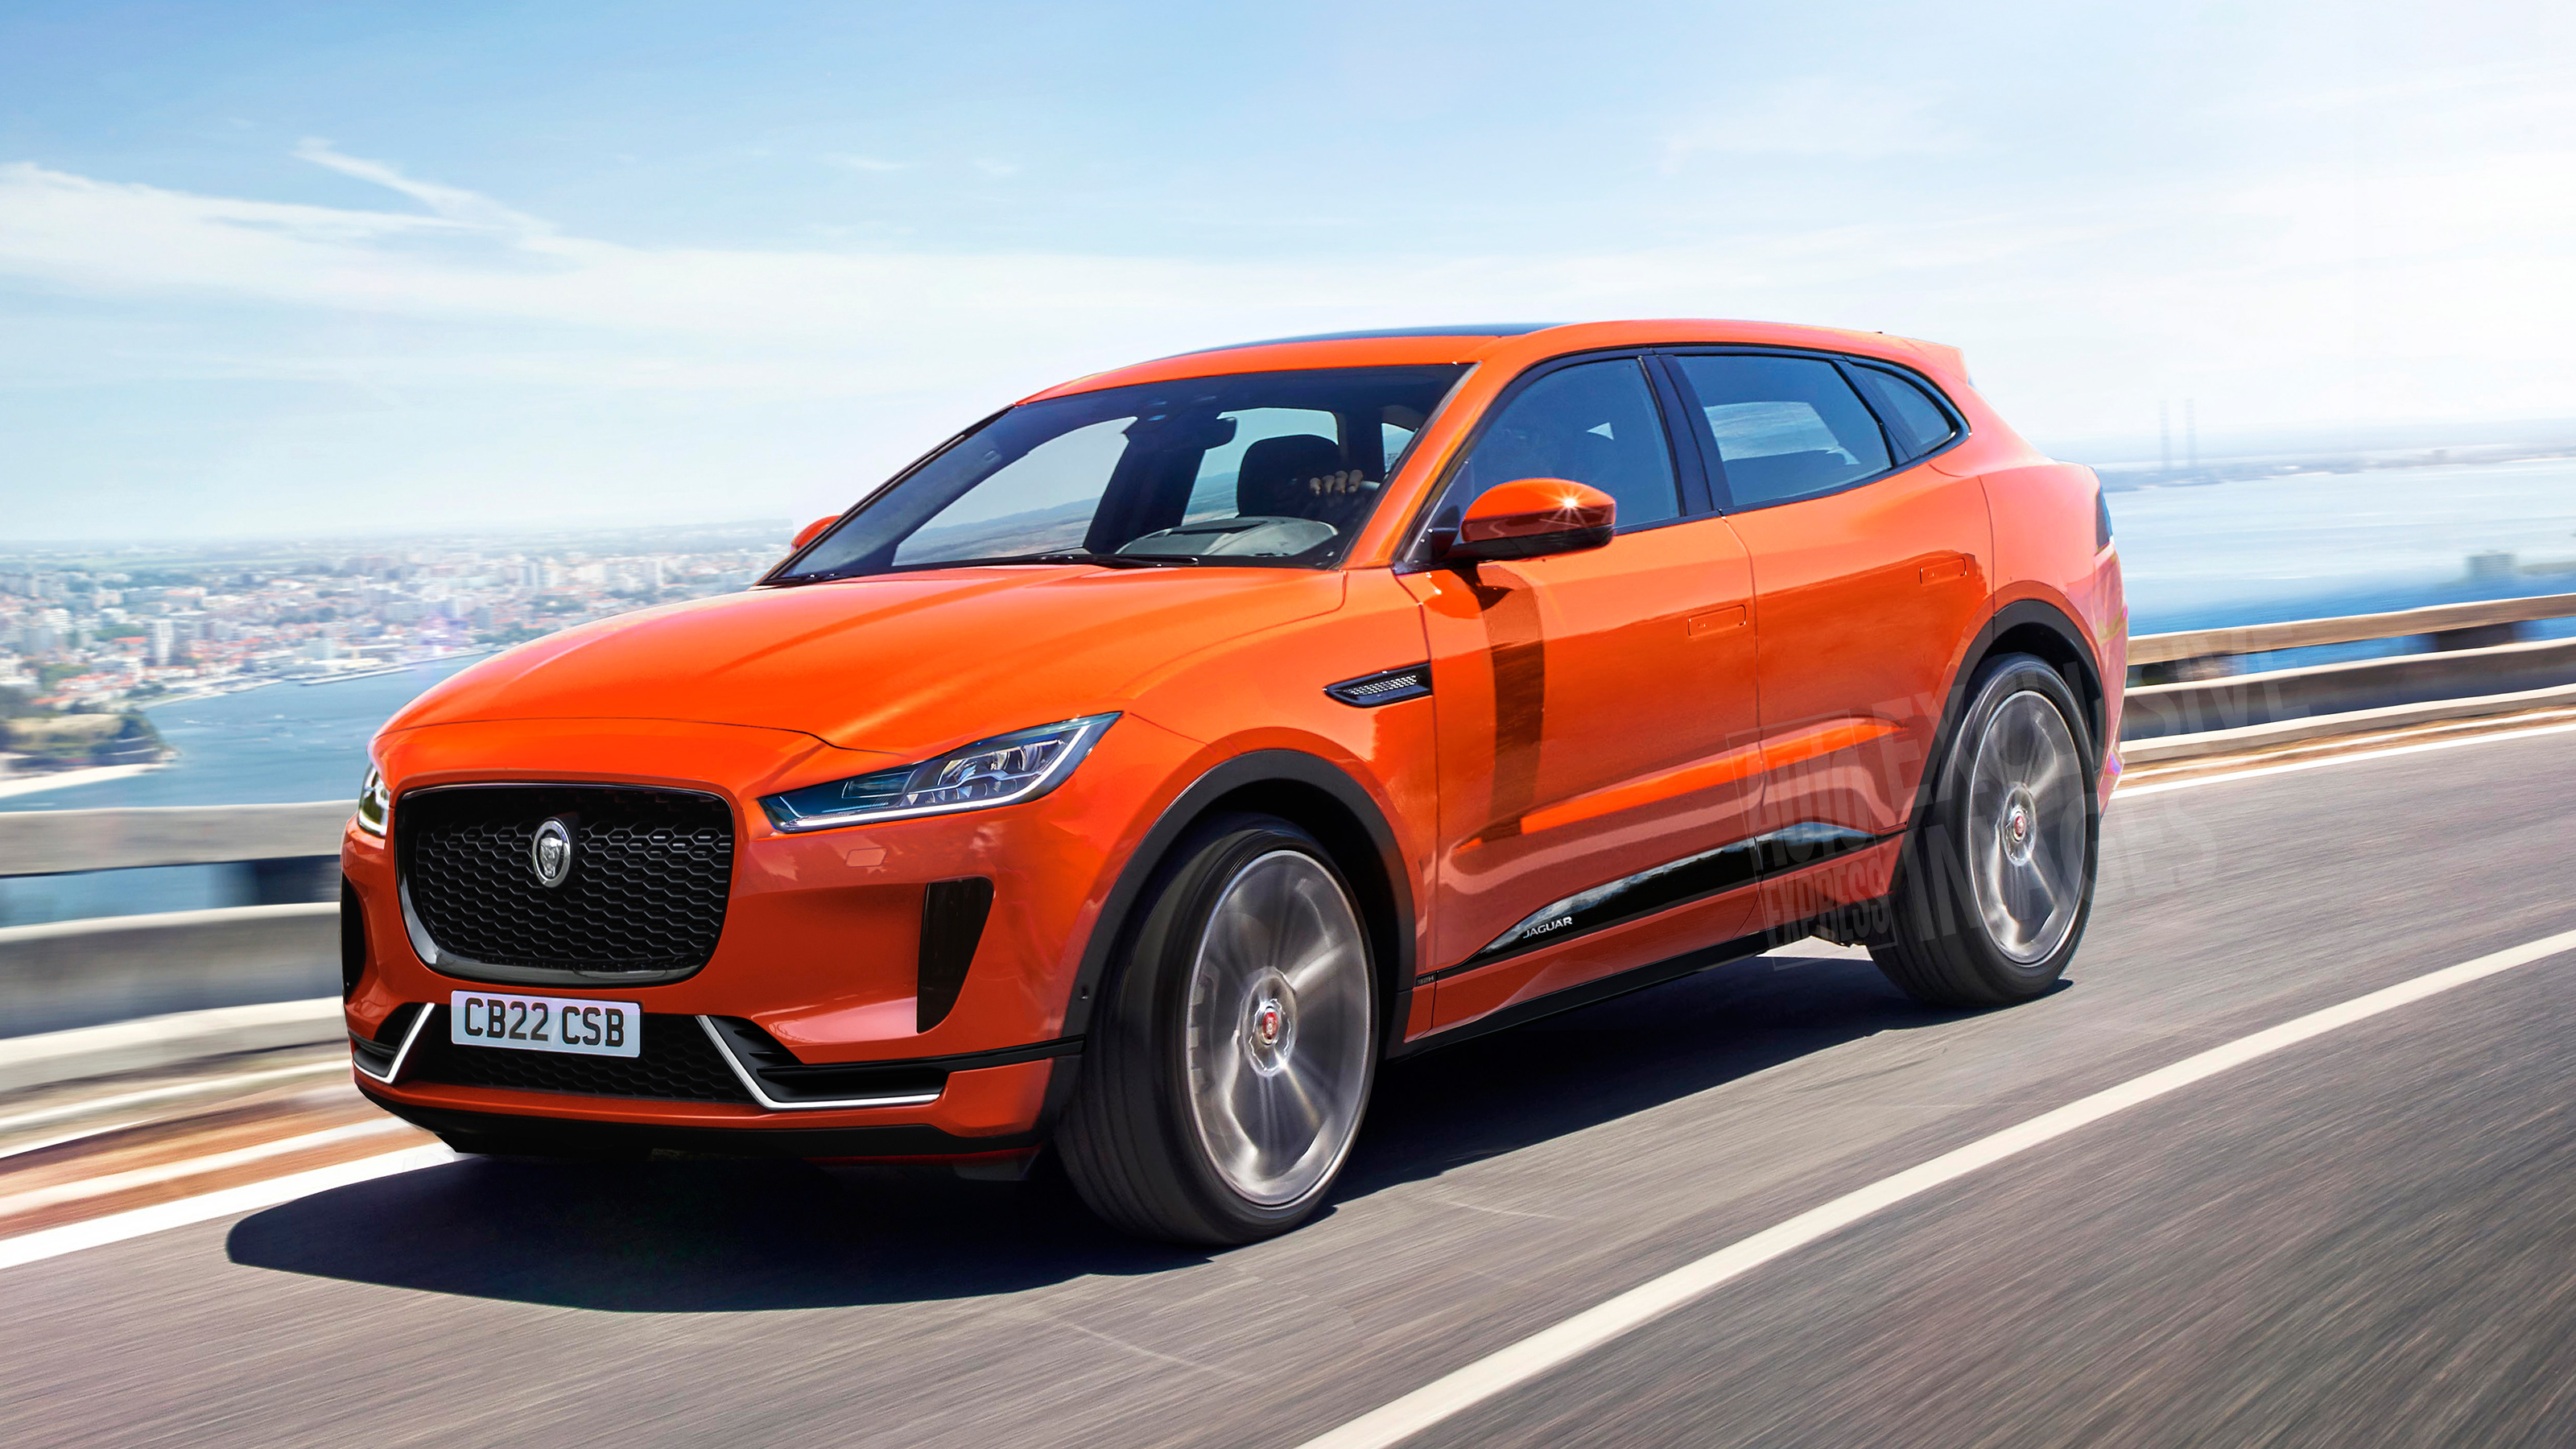 jaguar-j-pace-electric-suv-likely-axed-automotive-daily